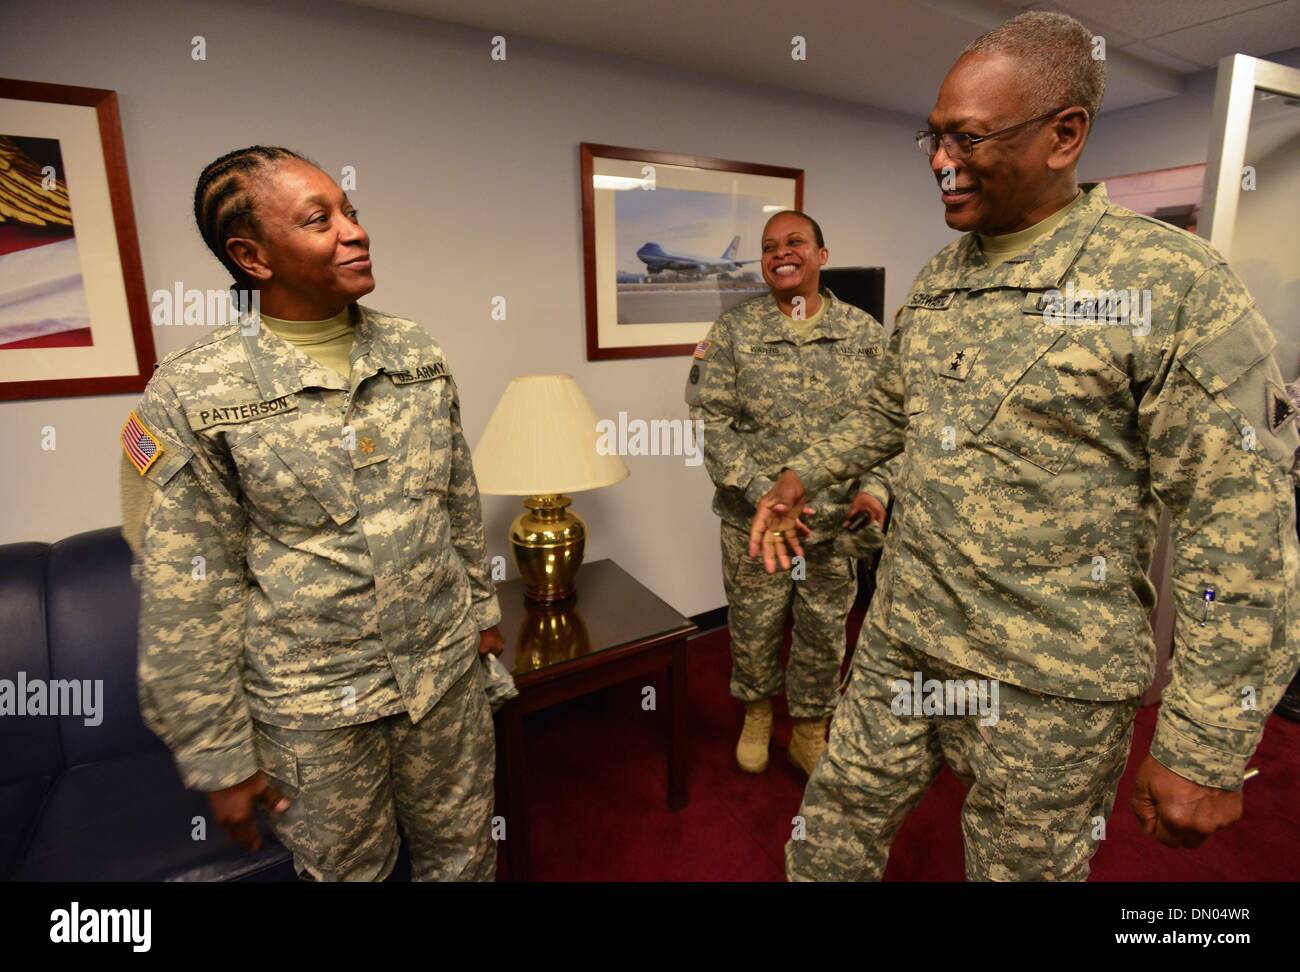 Washington, District of Columbia, US, USA. 17th Dec, 2013. ERROL R. SCHWARTZ, Commanding General, Joint Force Headquarters, District of Columbia National Guard, welcomes Sgt. SHARLEY PATTERSON and Sgt.CHARNICE WATERS as they arrive to the DC Armory for a homecoming ceremony for nearly 50 soldiers from D.C.'s Army National Guard 372nd Military Police Battalion. Both soldiers were returning from a 10-month deployment to Guantanamo Bay, Cuba, in support of Operation Enduring Freedom. Credit:  Miguel Juarez Lugo/ZUMAPRESS.com/Alamy Live News Stock Photo